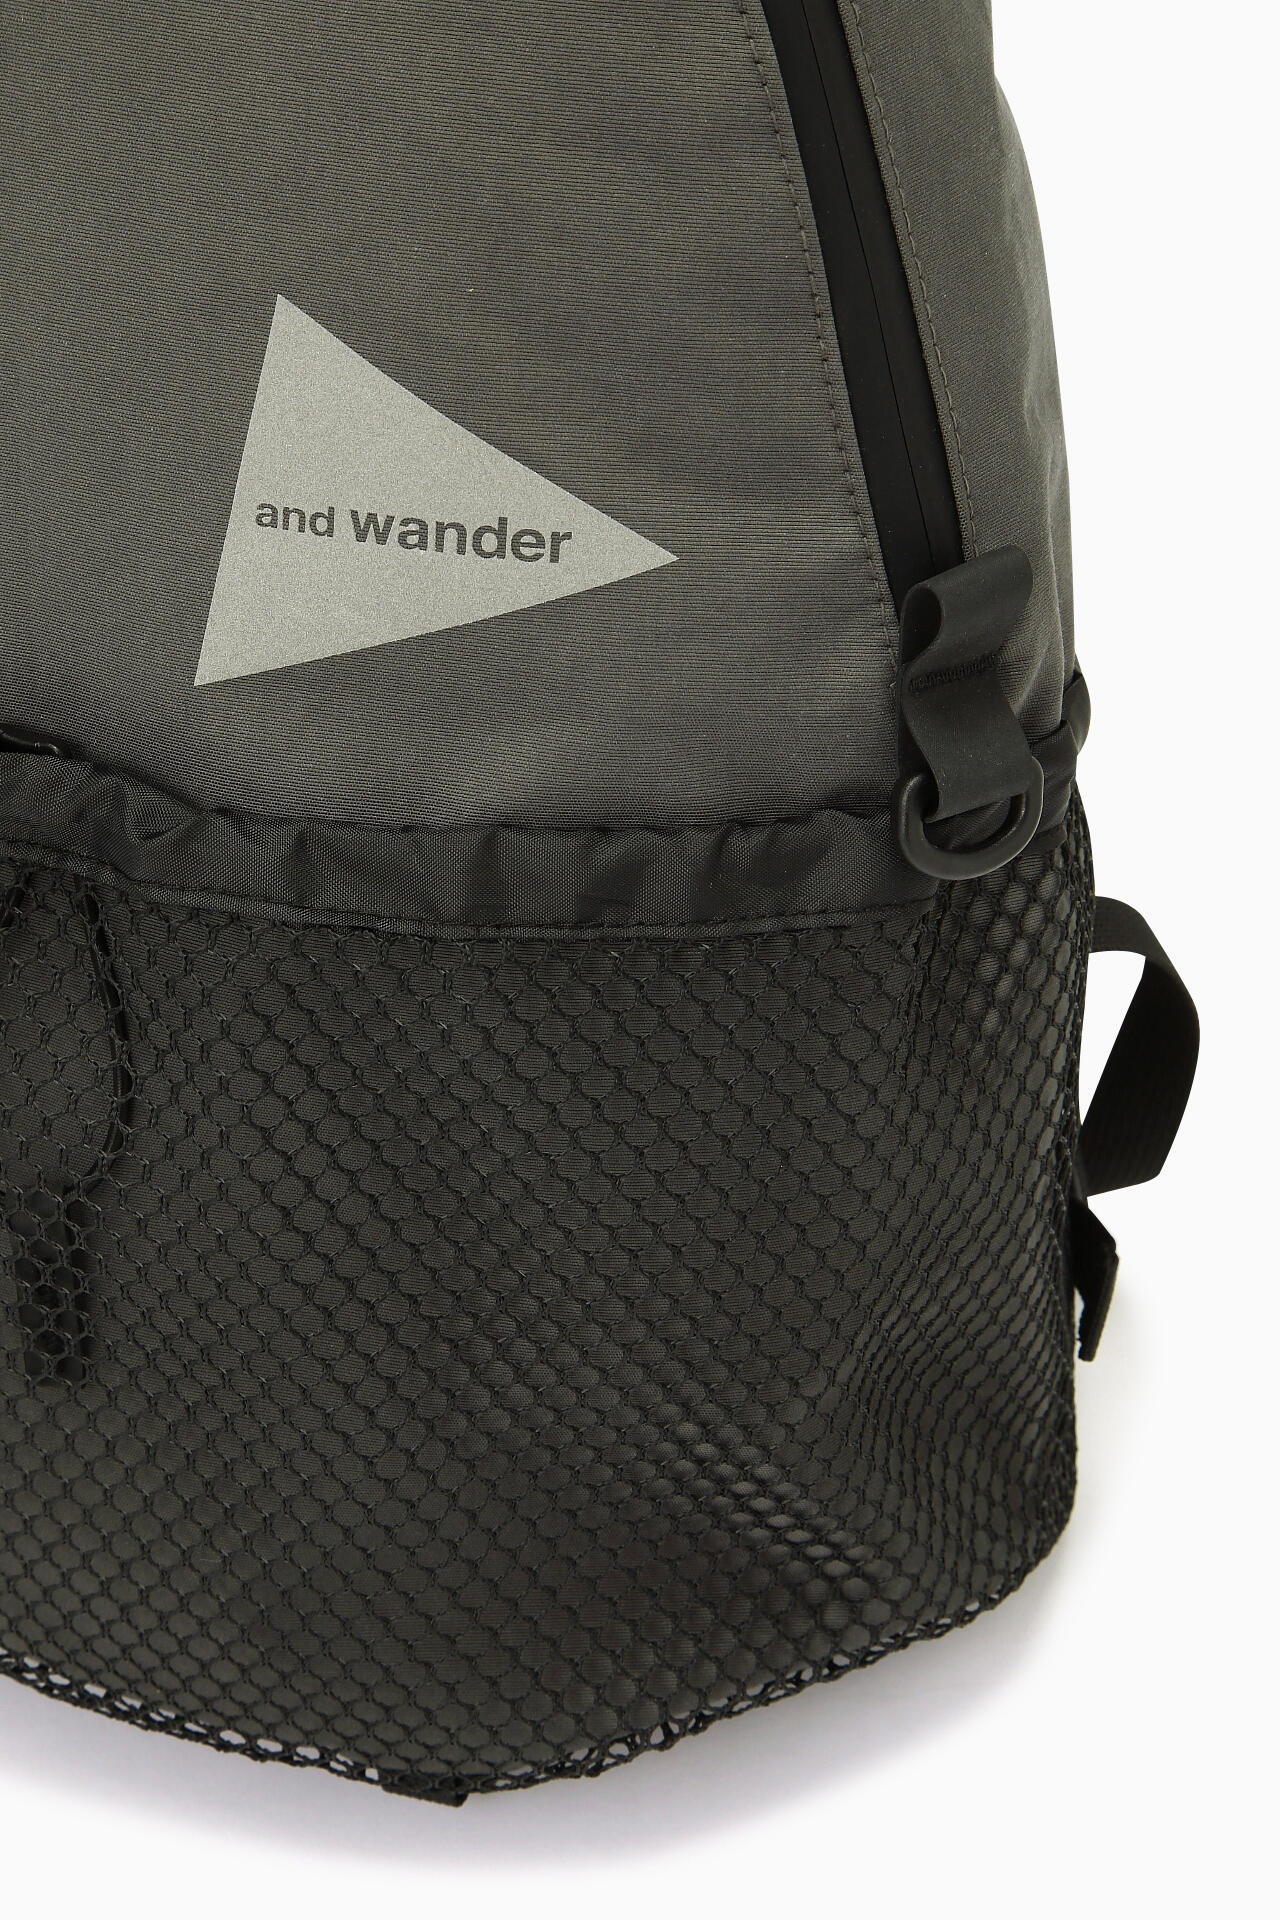 PE/CO 20L daypack | backpack | and wander ONLINE STORE